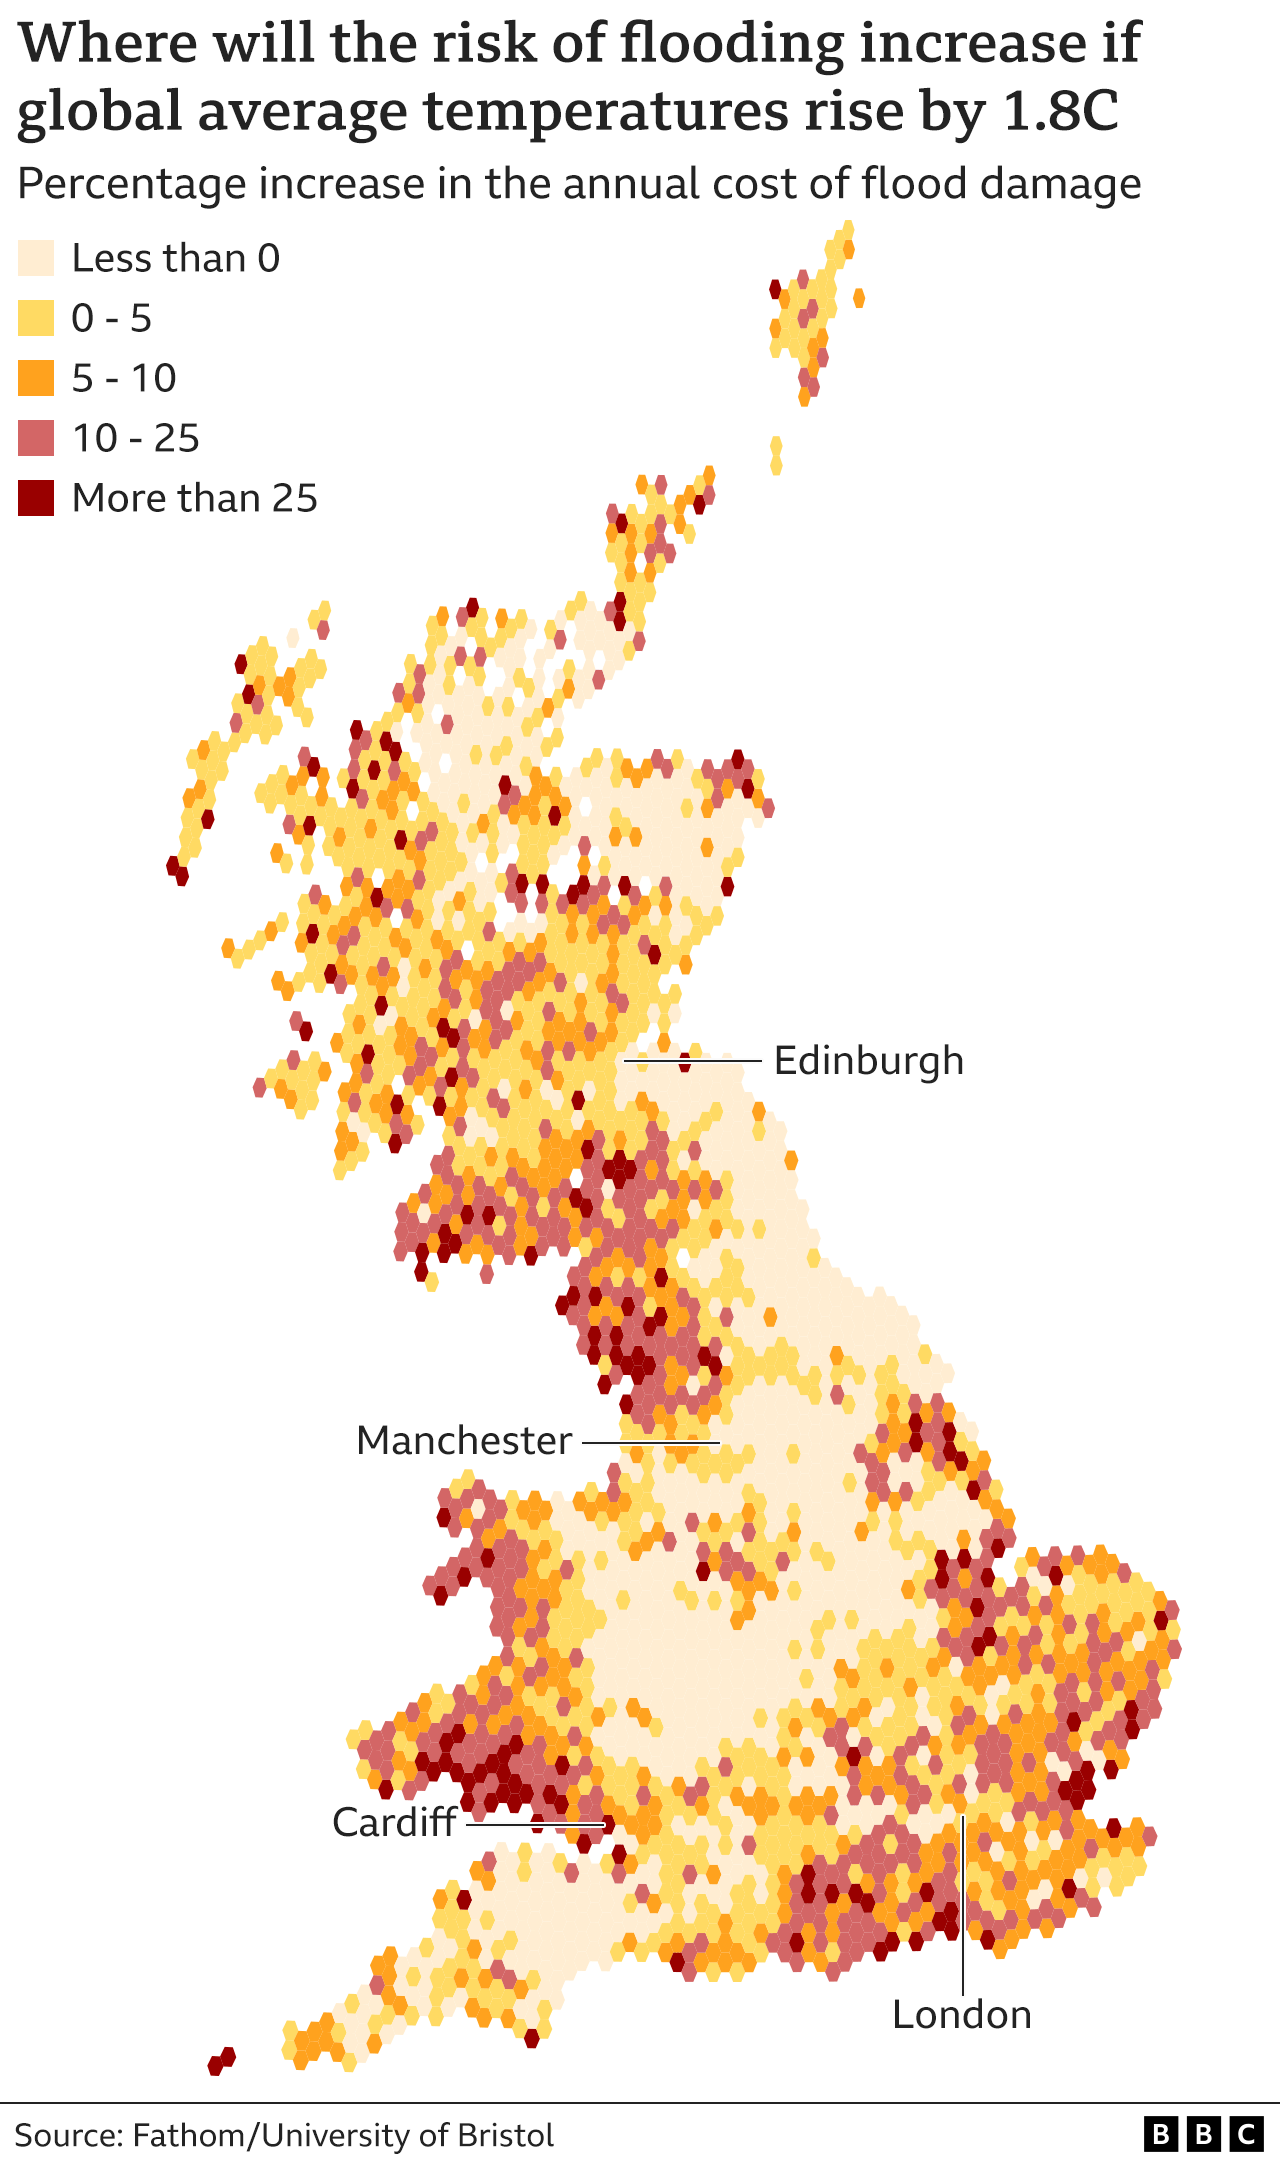 Map showing flood risk increase and decrease in mainland Britain, with the highest increases in coastal areas in the south, east and the northwest coast of England, while central England and locations near major cities are not projected to increase as much.